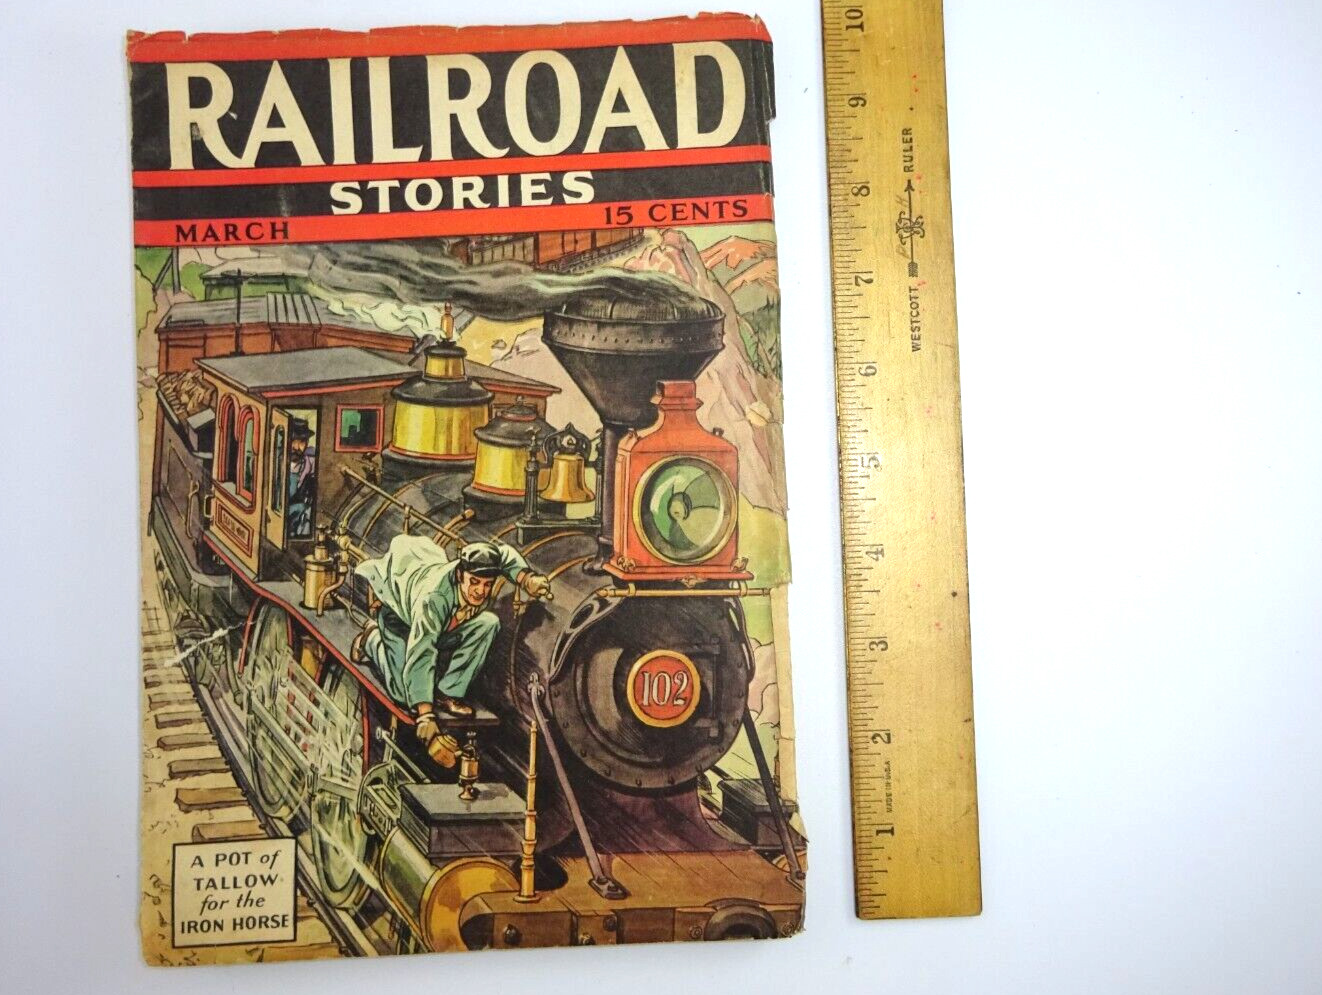 RAILROAD STORIES MAGAZINE ISSUE MARCH 1937 UNCLE SAMS ISLAND RAILWAY & IRON PIKE